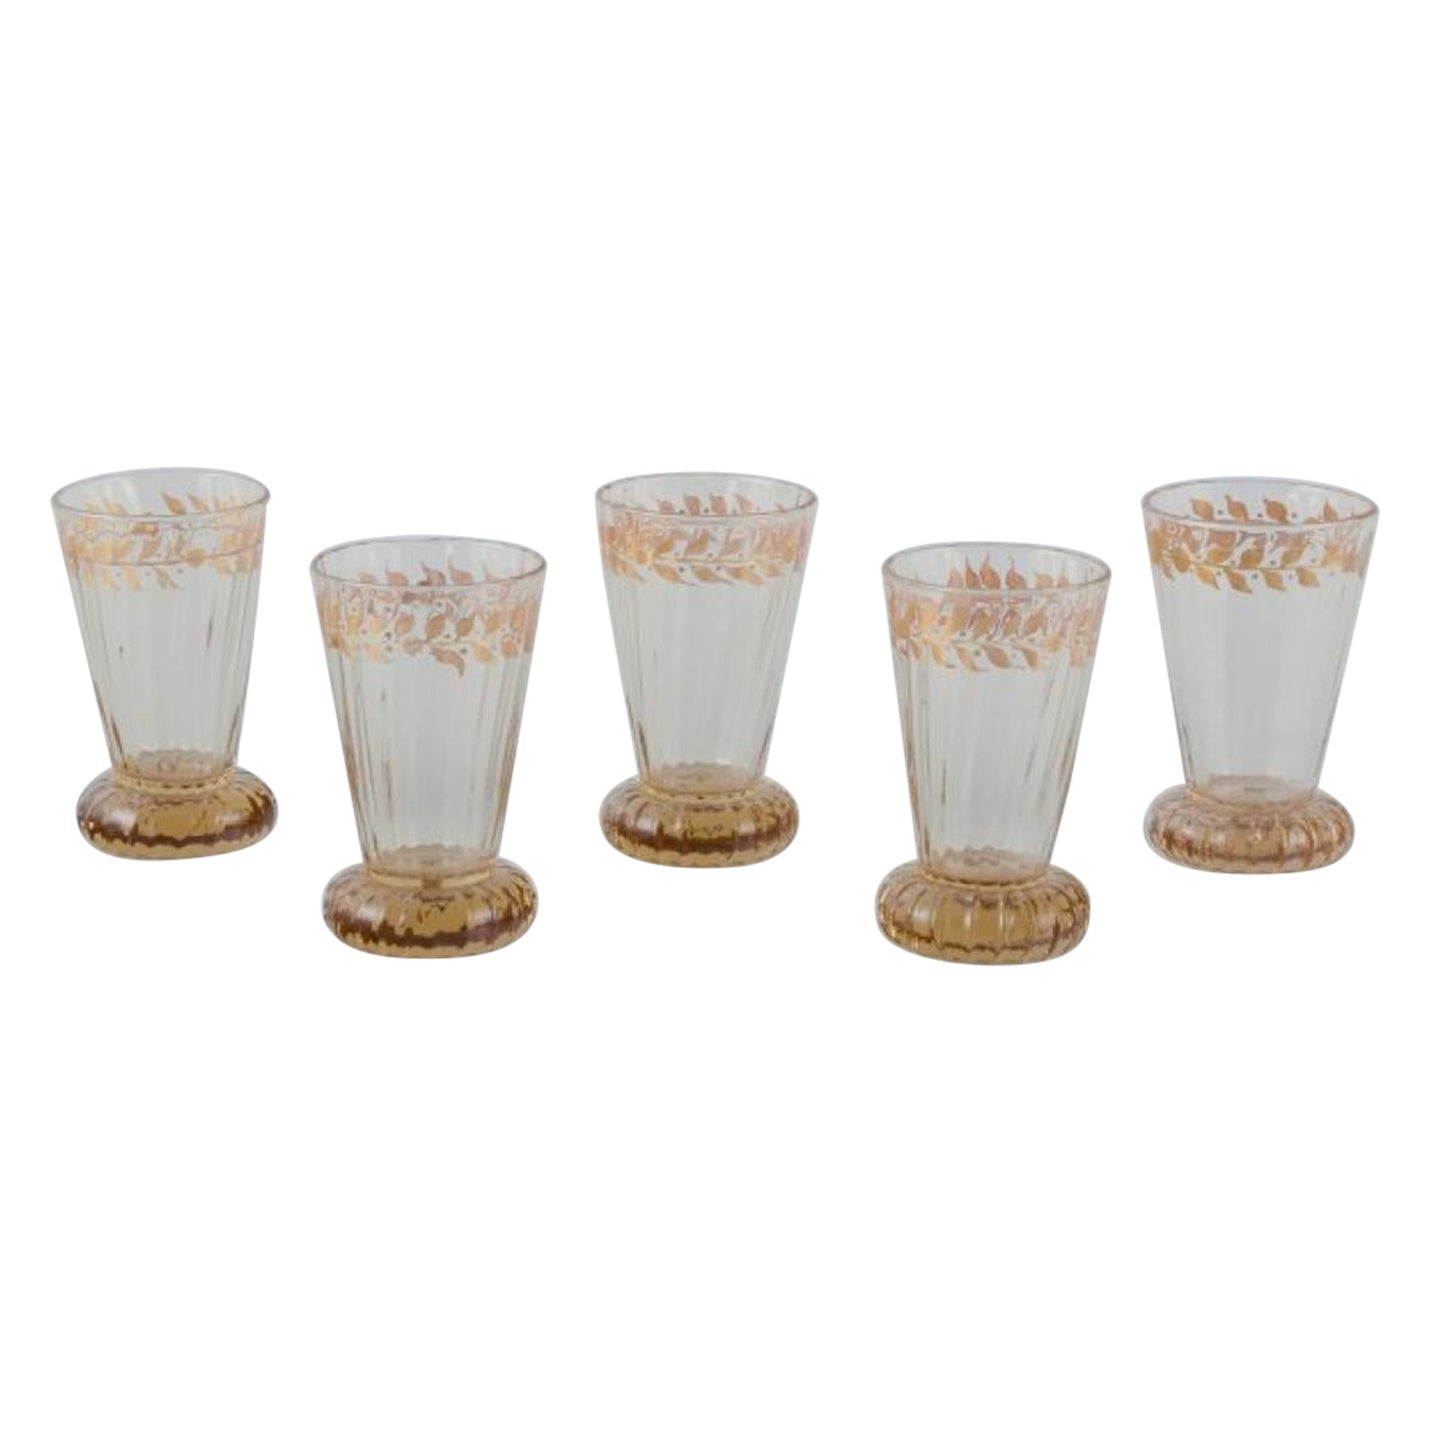 Emile Gallé, French artist and designer. Five small crystal glasses. 1870/80s